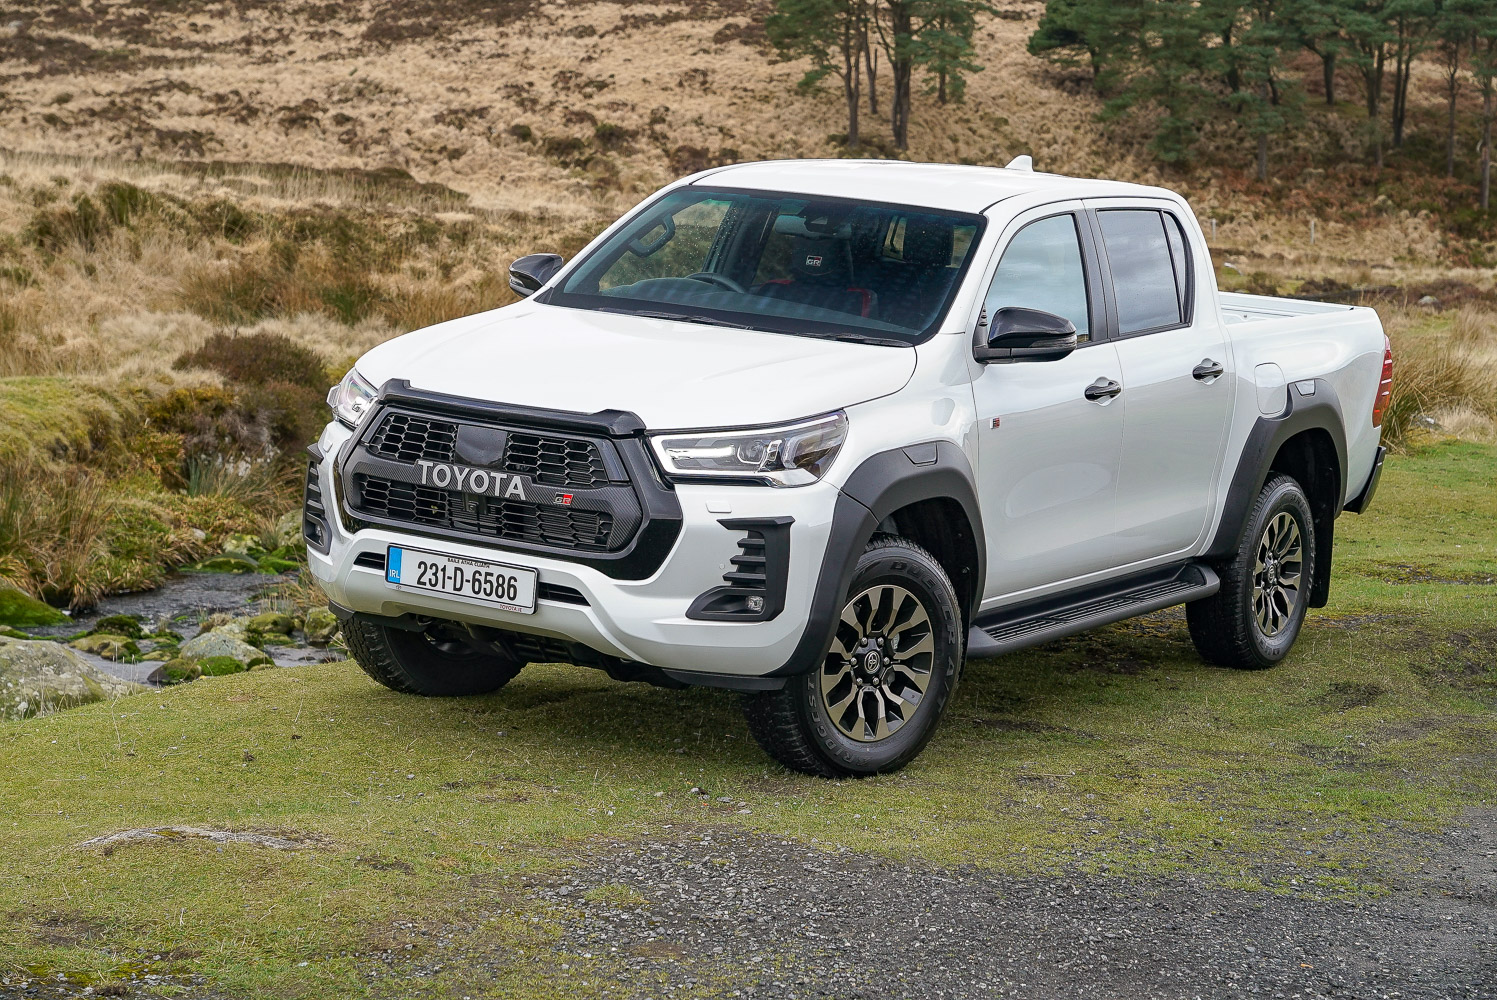 Toyota Hilux News and Reviews